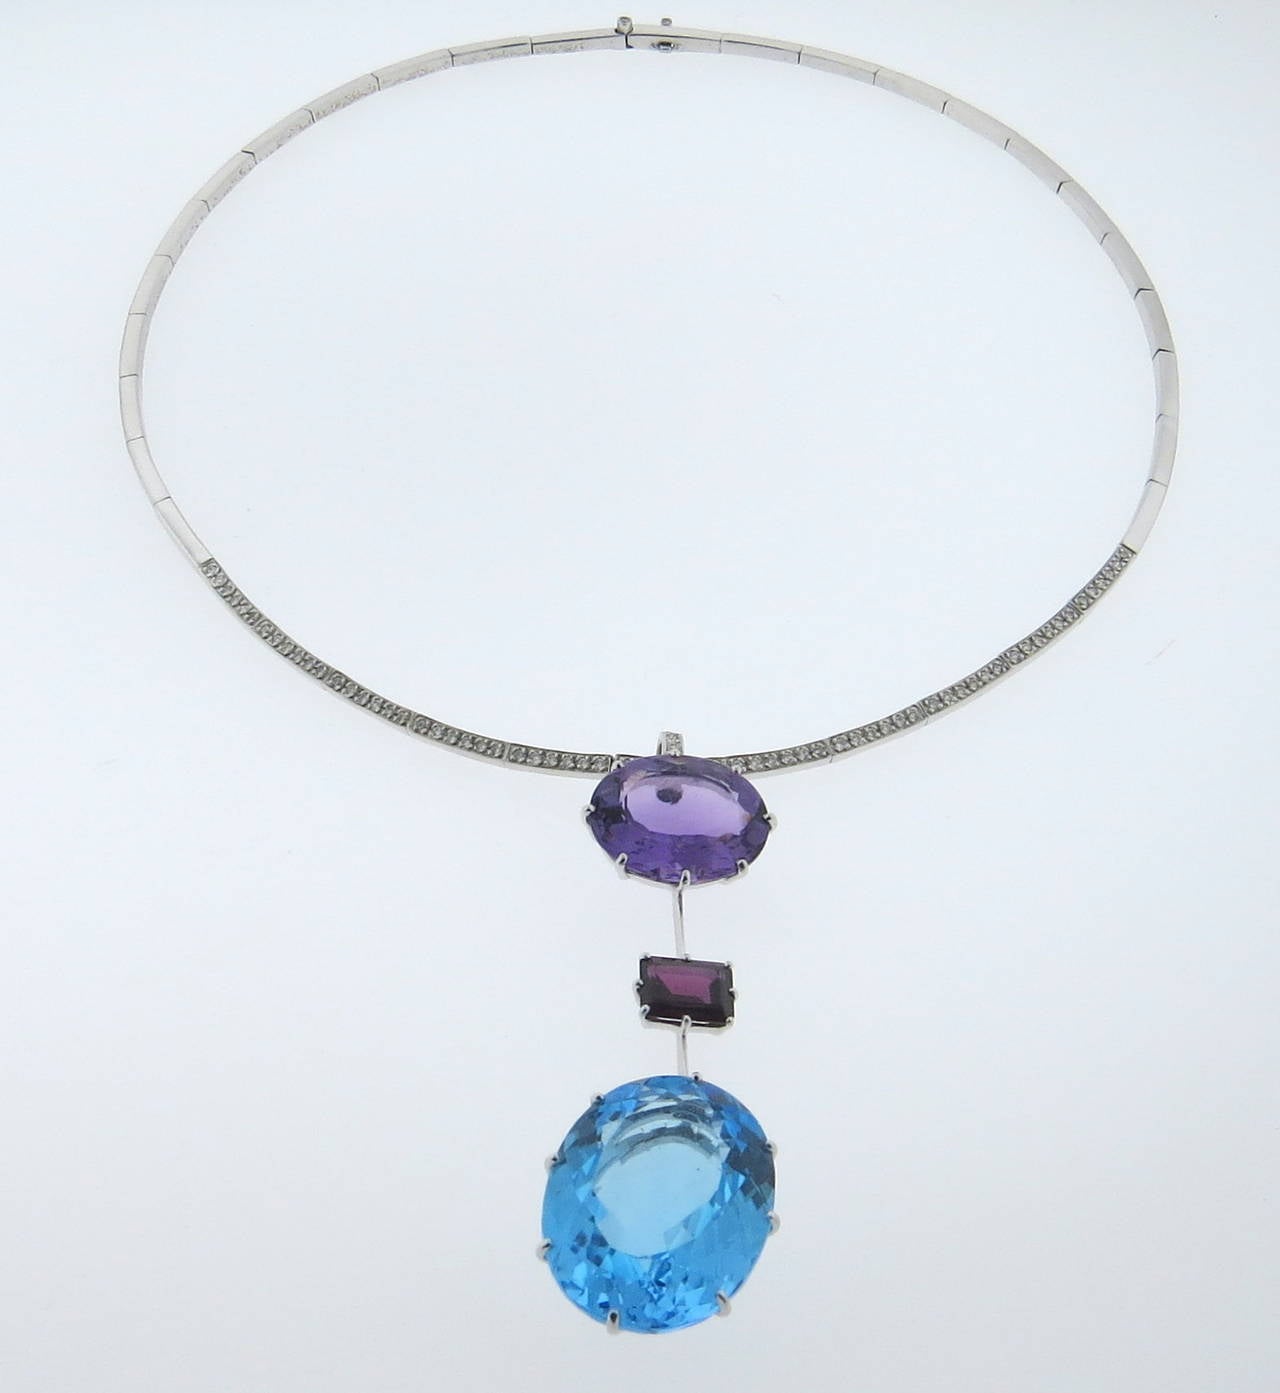 18k white gold necklace, crafted by H Stern, decorated with approximately 0.64ctw in diamonds, 18mm x 15mm amethyst, 25mm x 20mm x 21mm  blue topaz and 9mm x 7mm pink tourmaline gemstone drop pendant. Necklace is 16 1/4